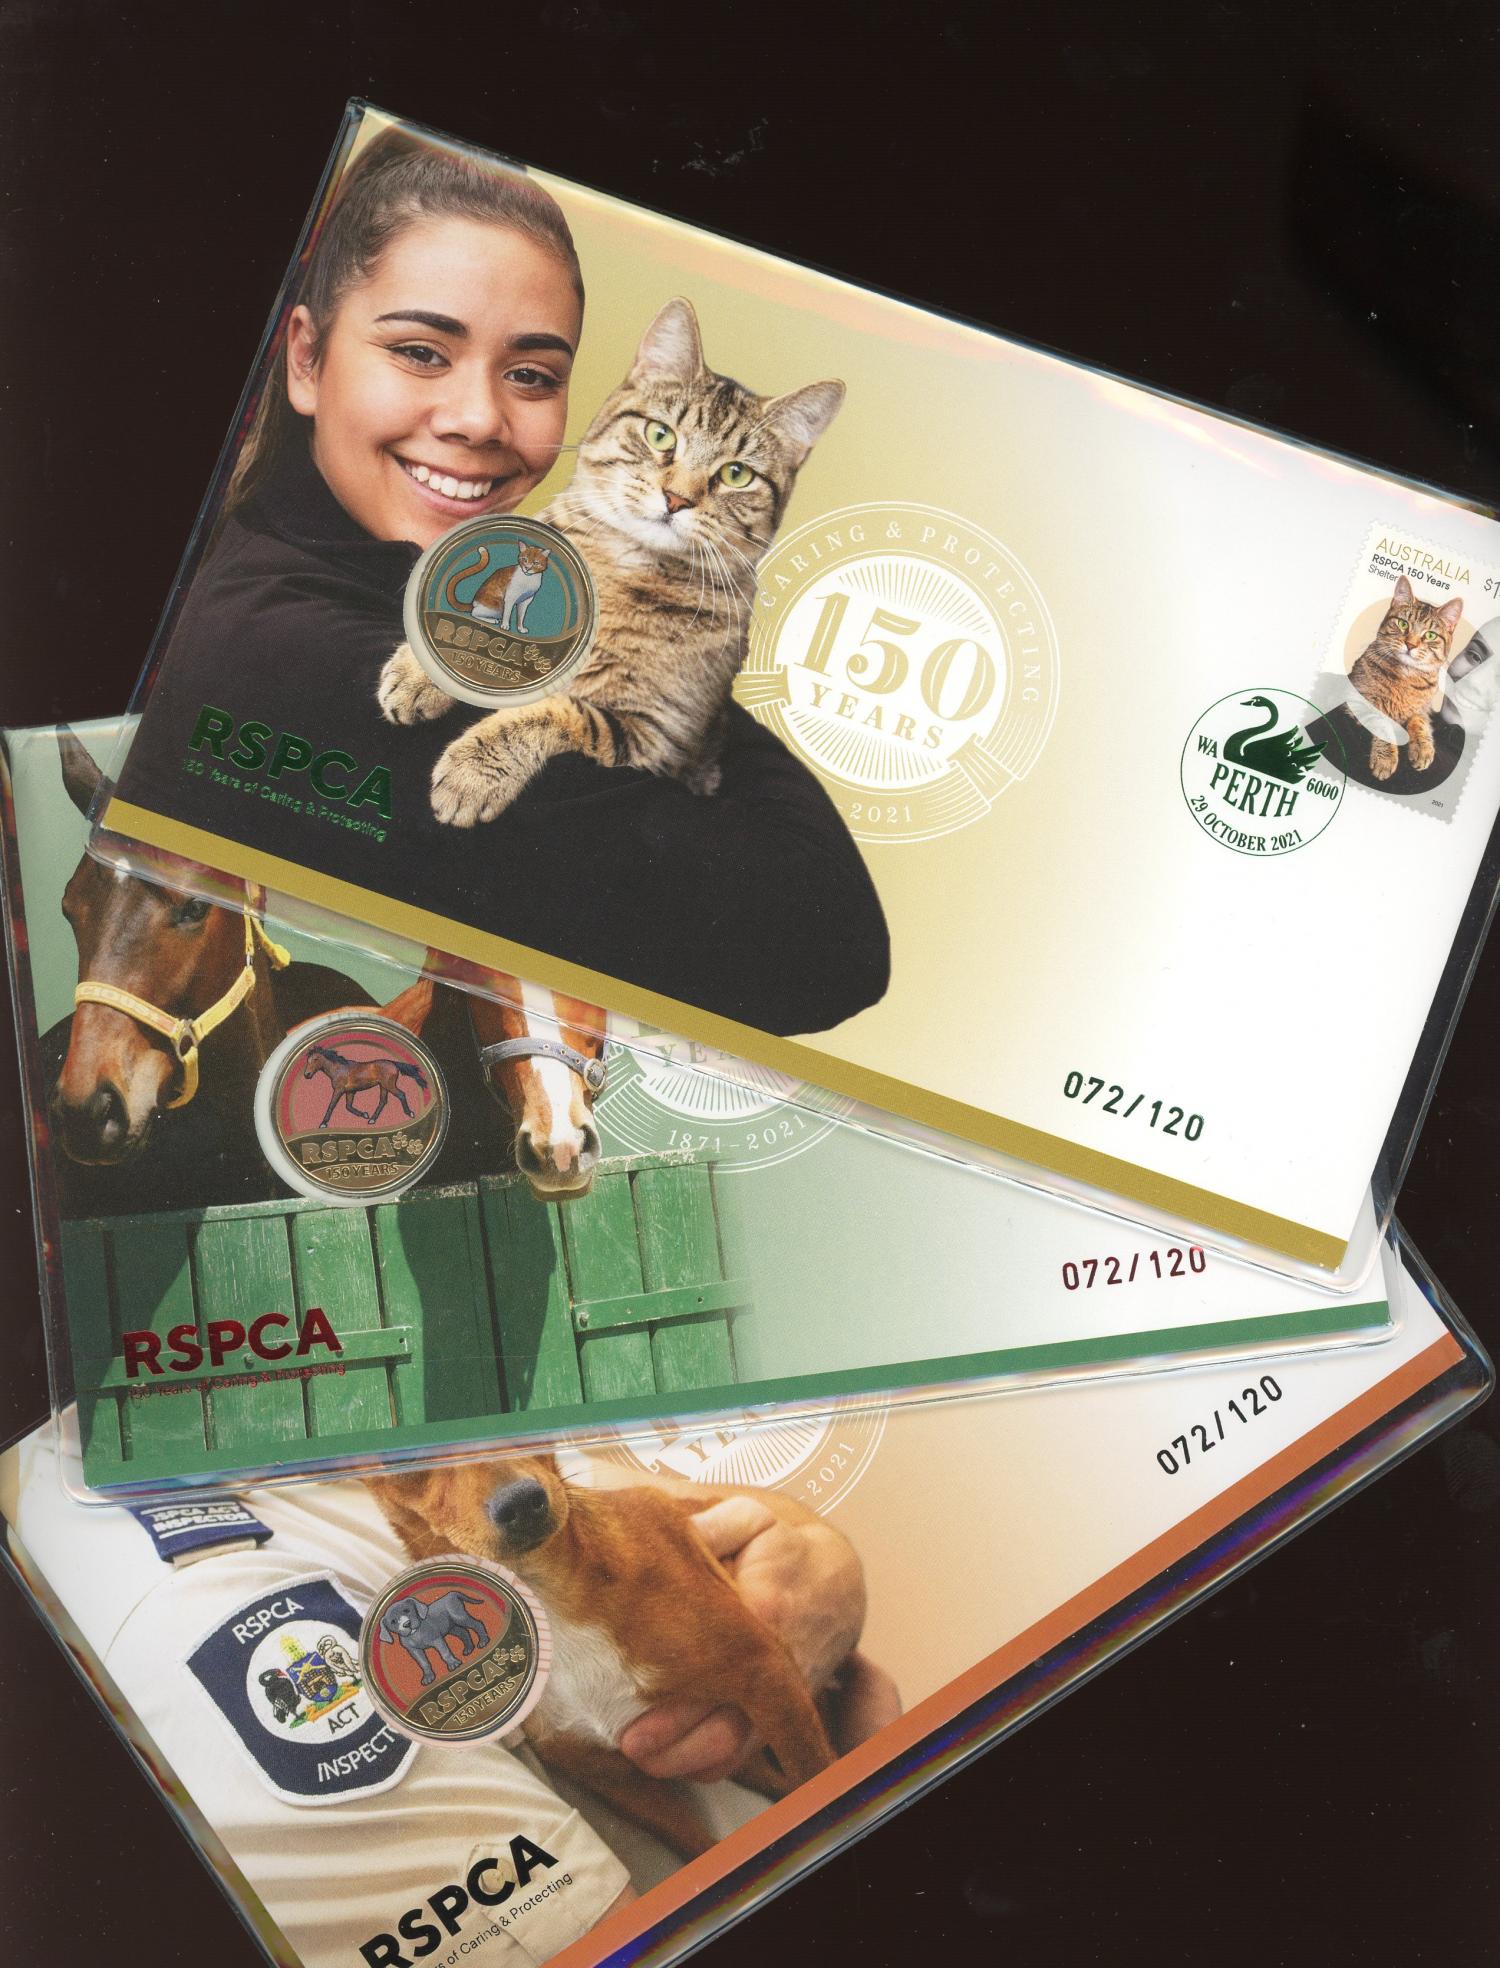 Thumbnail for 2021 Perth Coin and Stamp Show Set of 3 RSPCA PNC's 29th October - 31st October Set Number 072